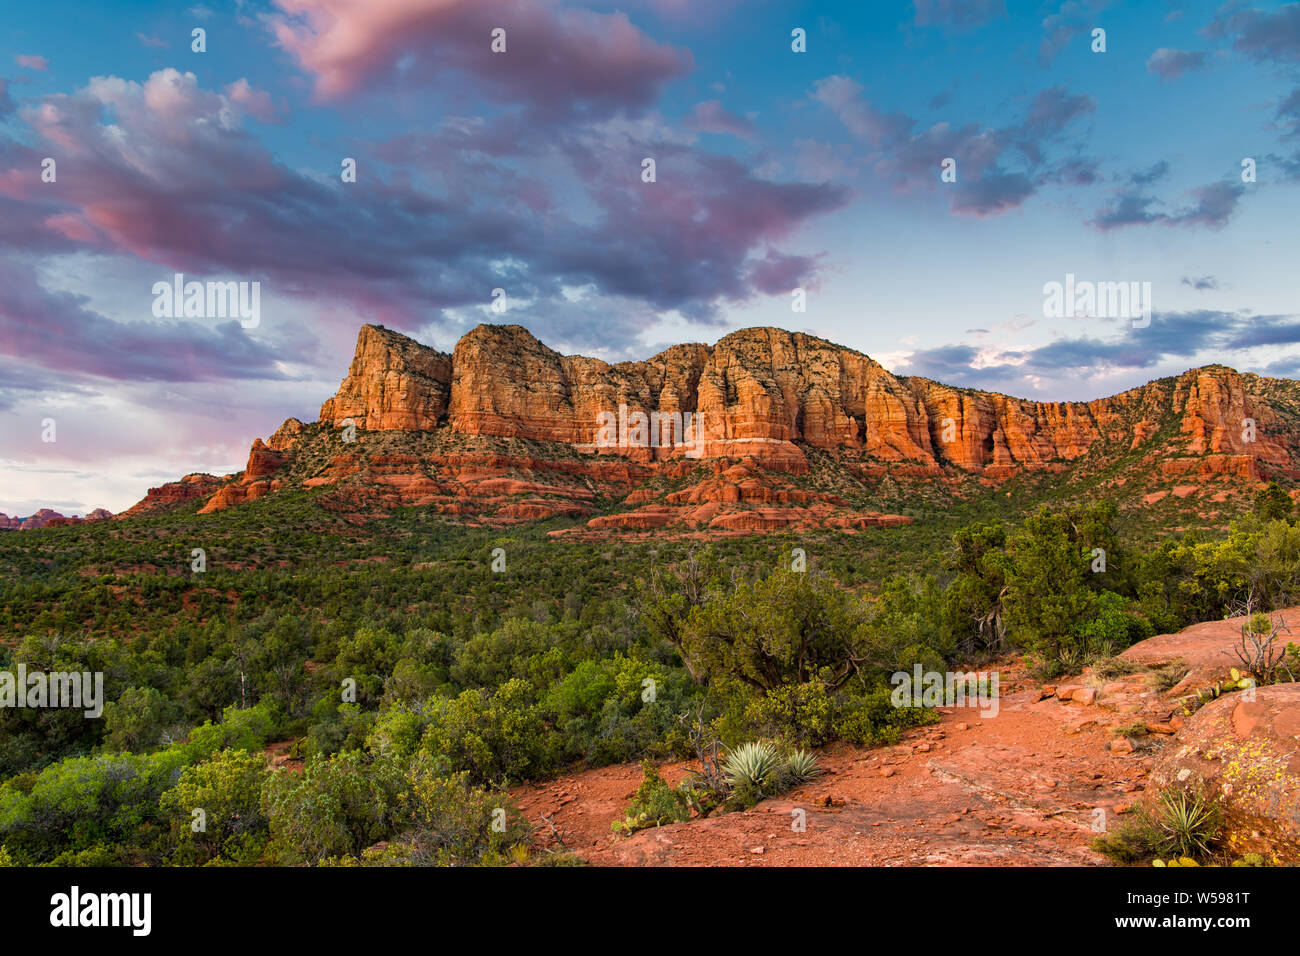 Sunset illuminates a beautiful landscape of red rock formations and green juniper tree forest below a blue sky with colorful pink and purple clouds Stock Photo